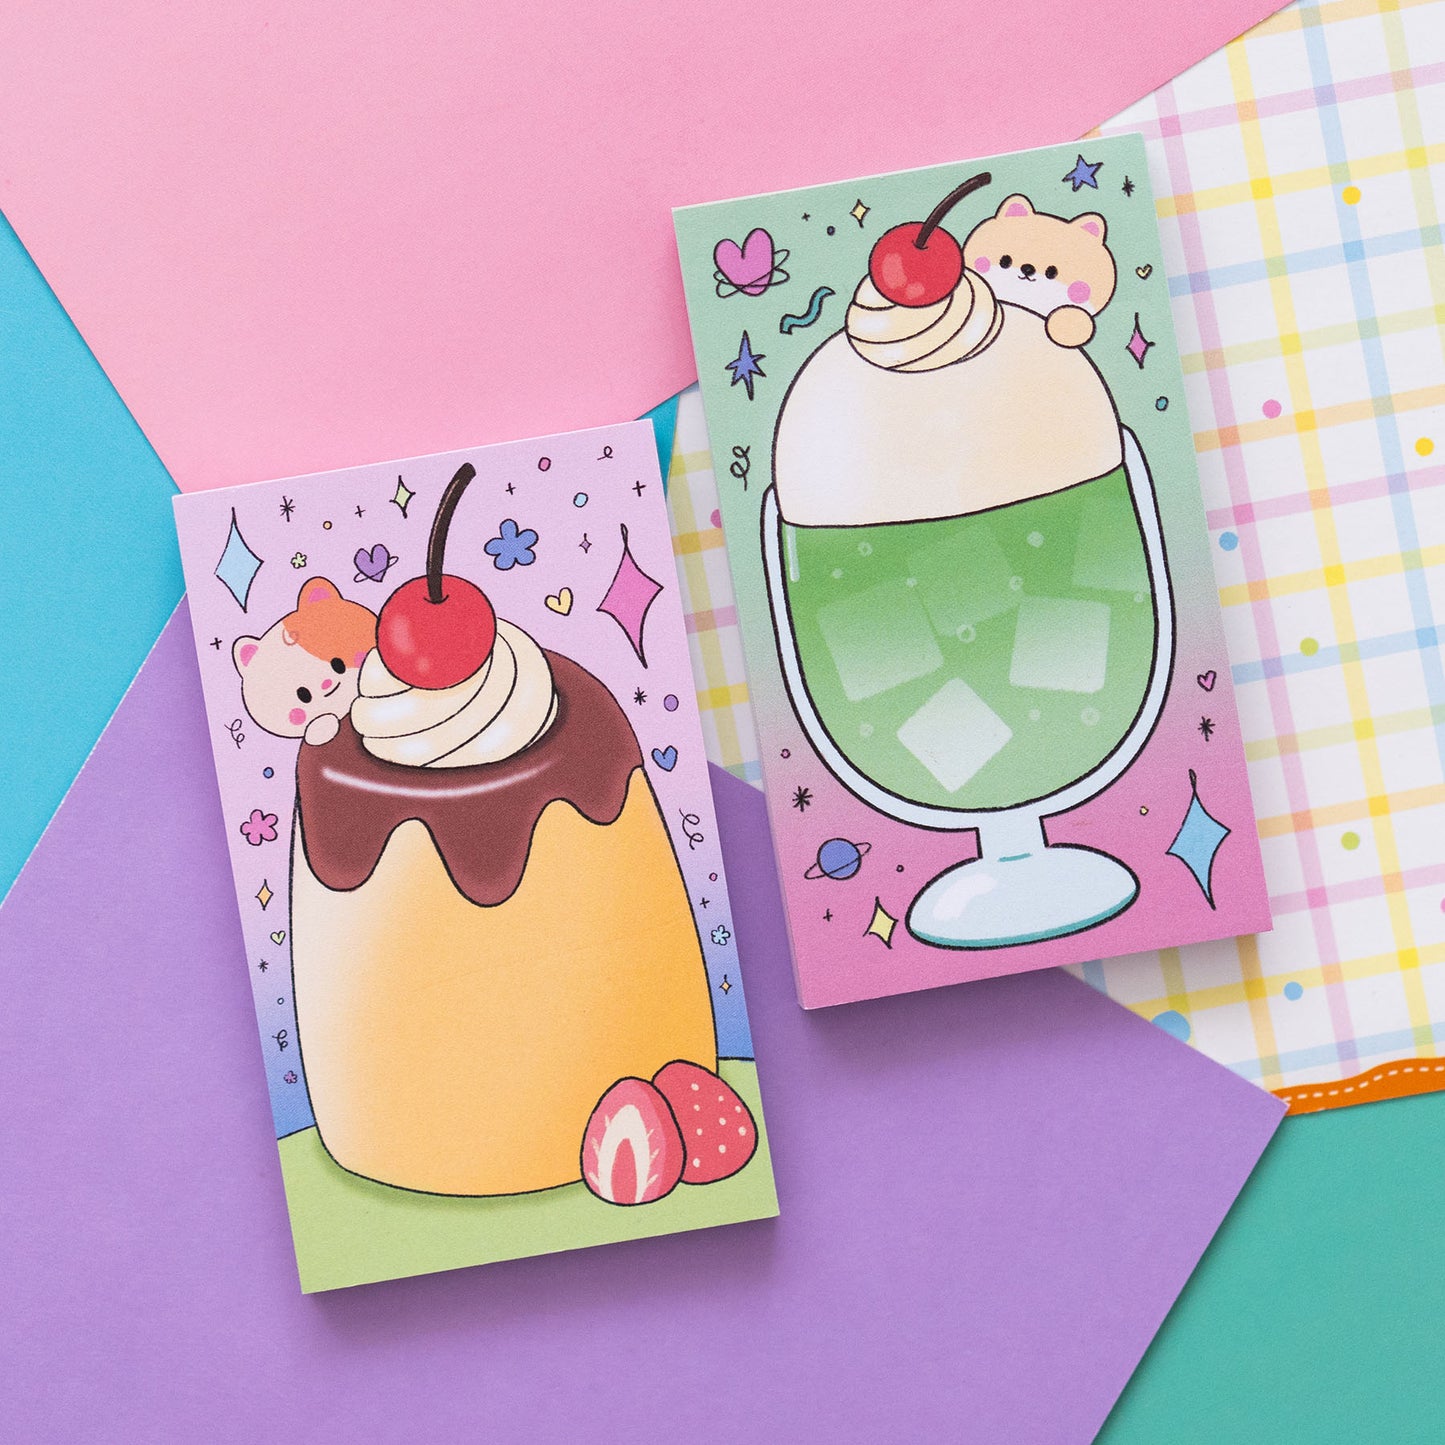 Pudding and Cream Soda Memo Pad by mintymentaiko